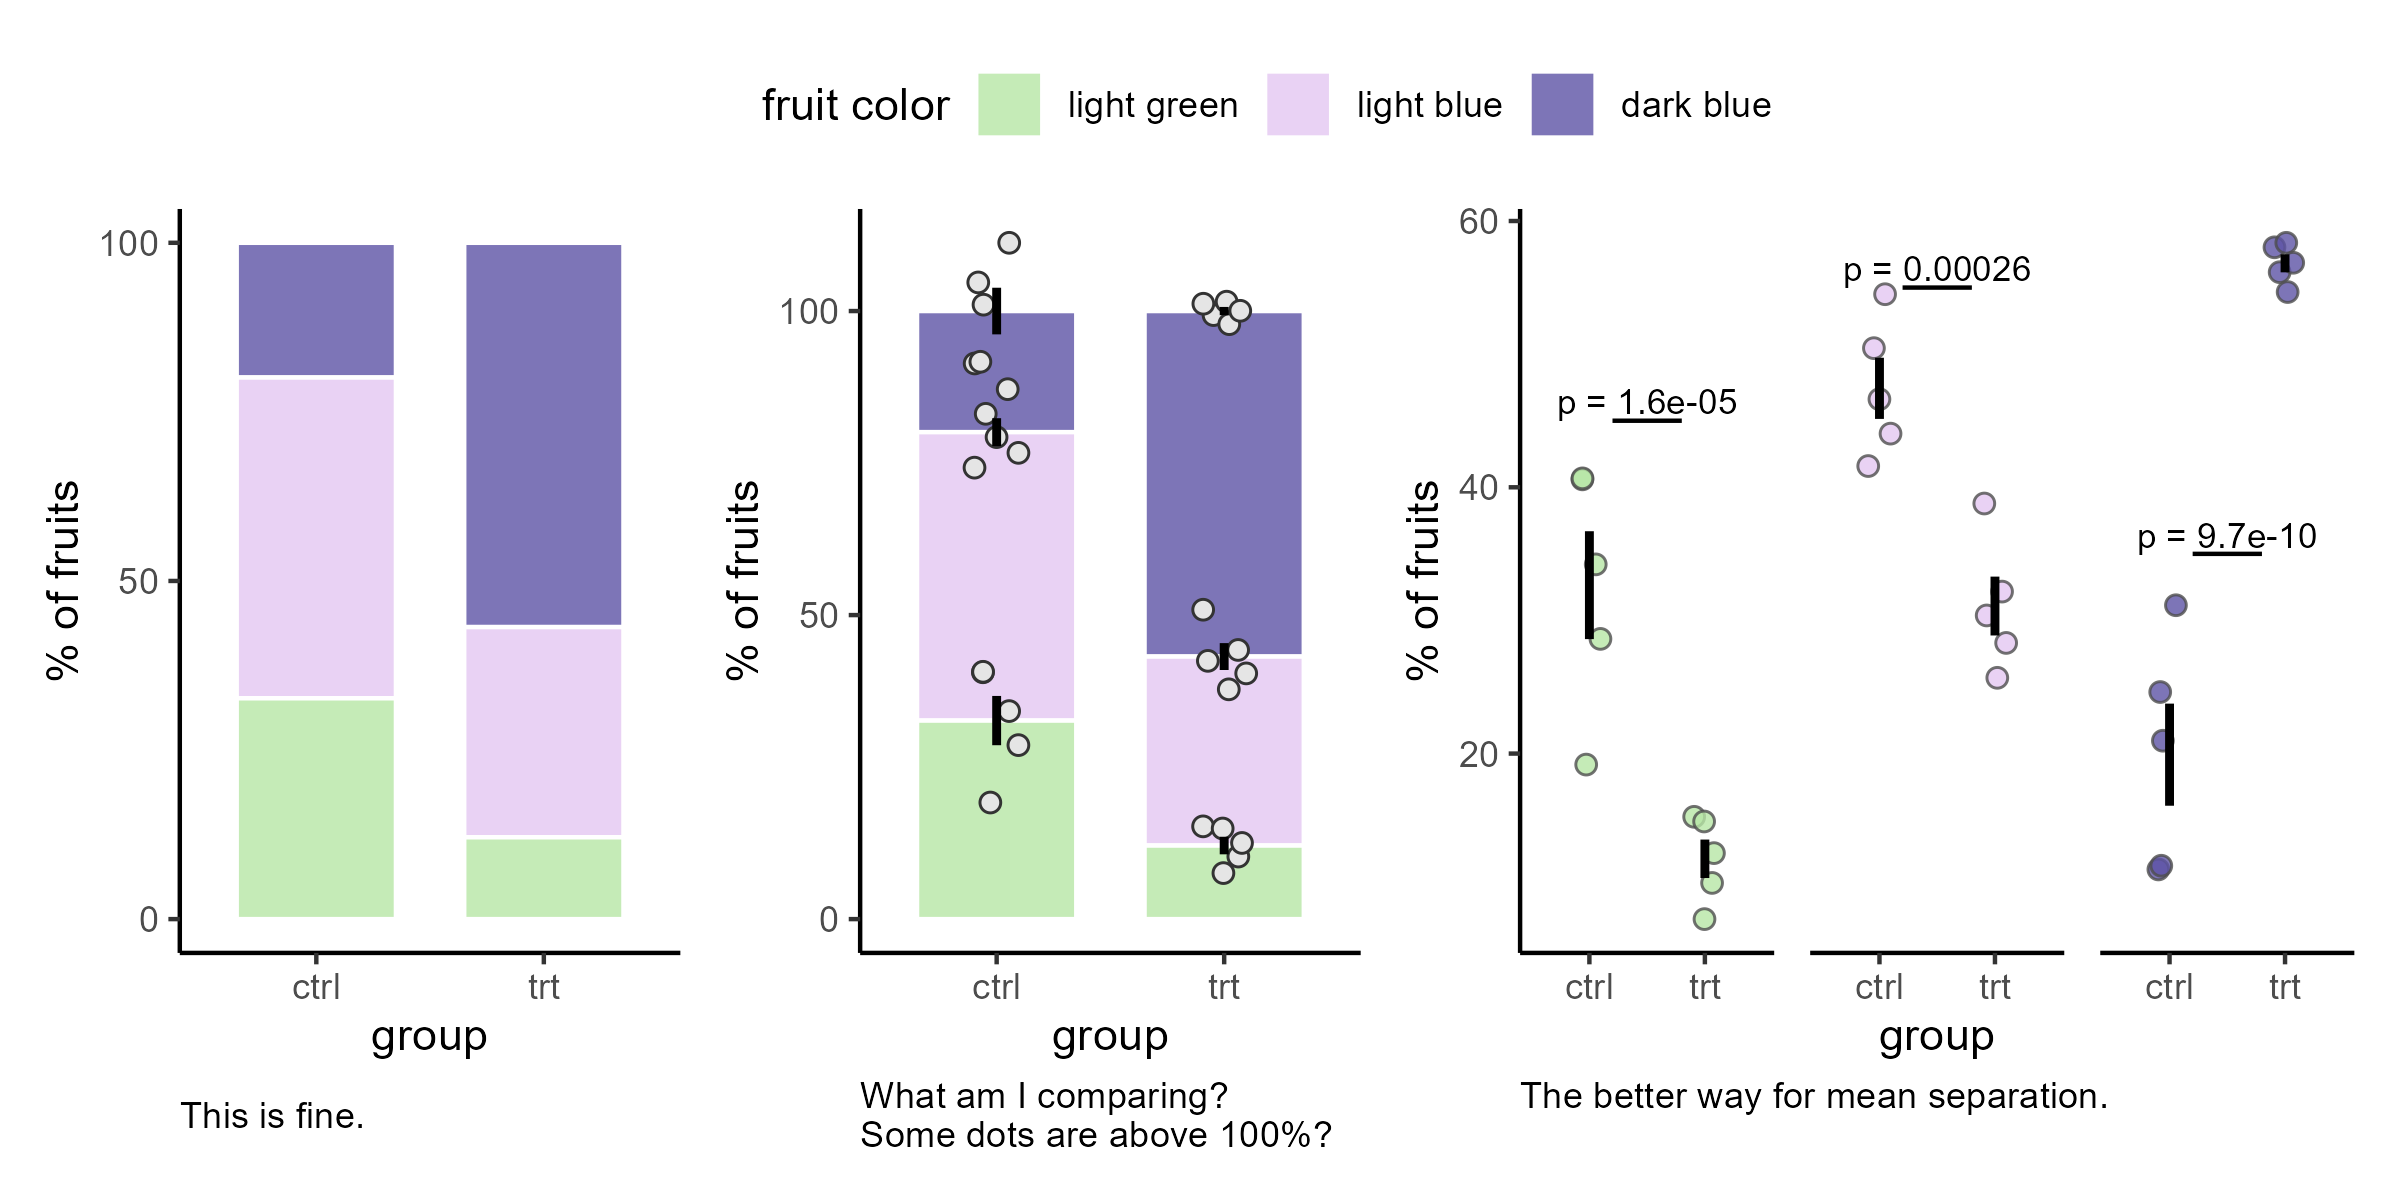 Don't mix stacked bar plots with mean separation plots